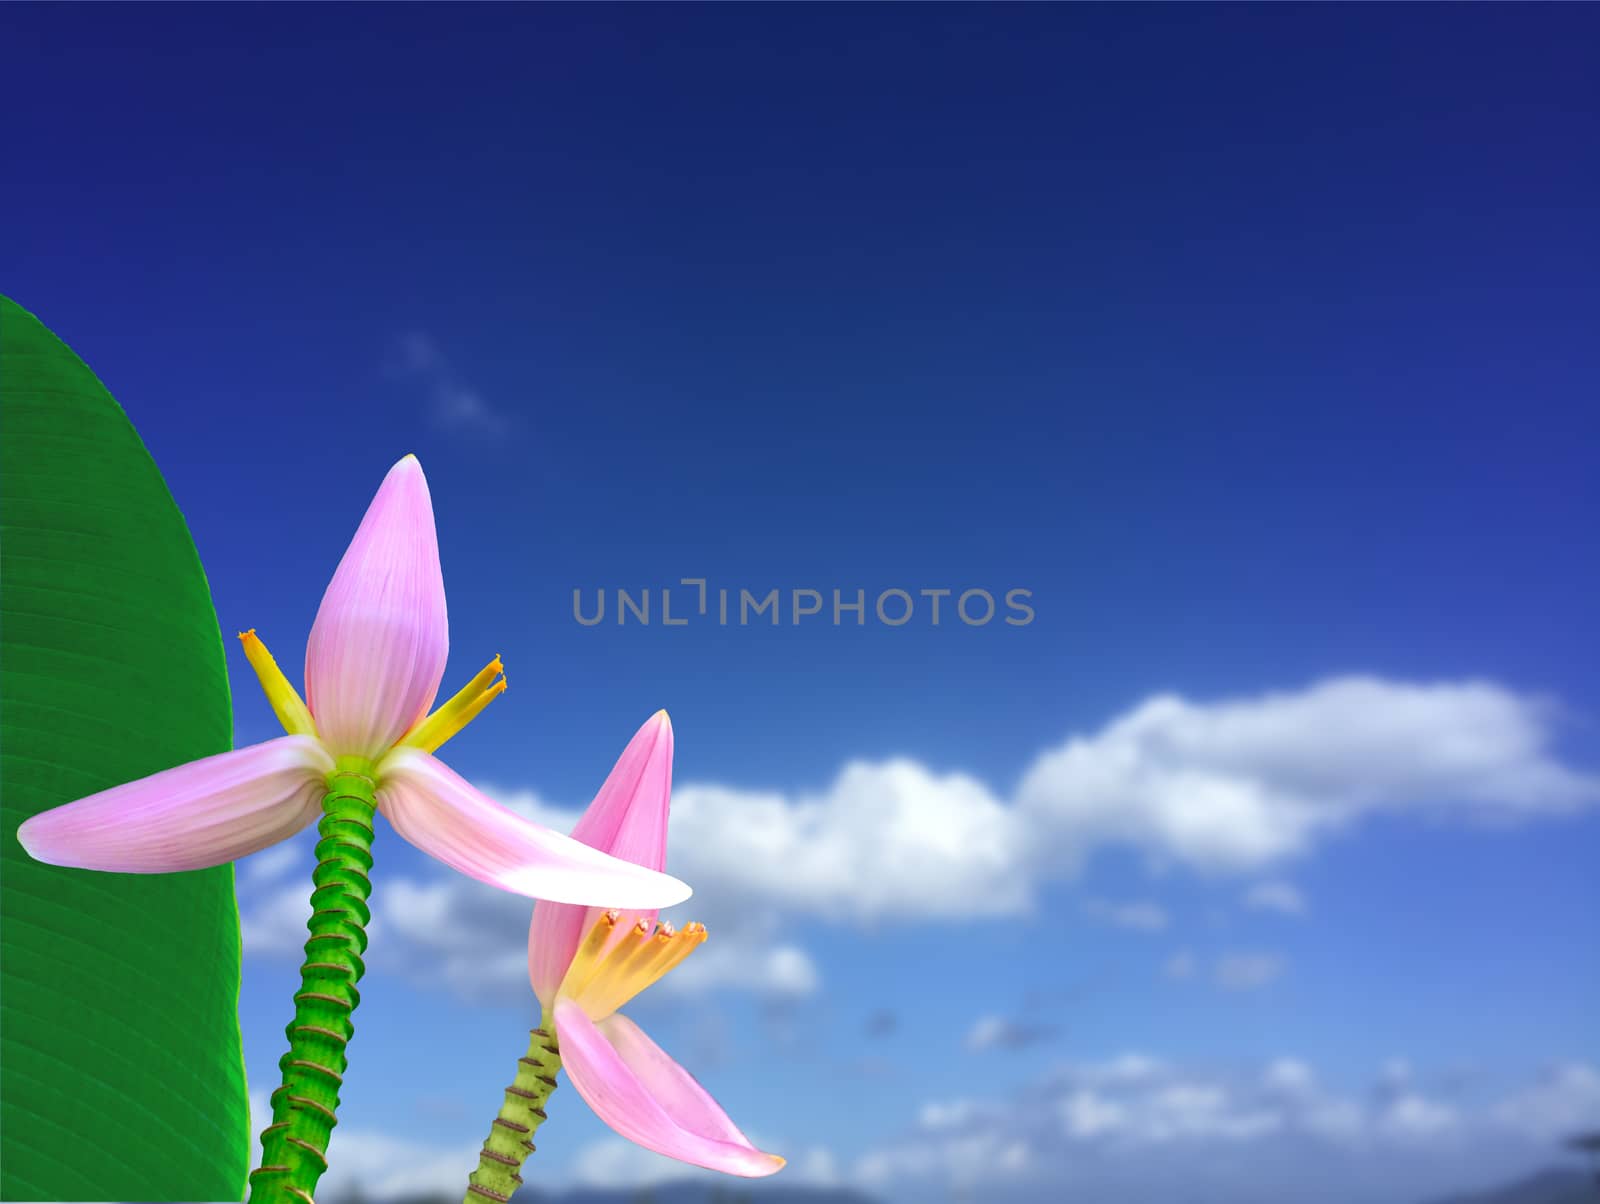 Pink banana flowers beautiful blossom with blue sky nature blurred background. Floral nature background with Copy space.